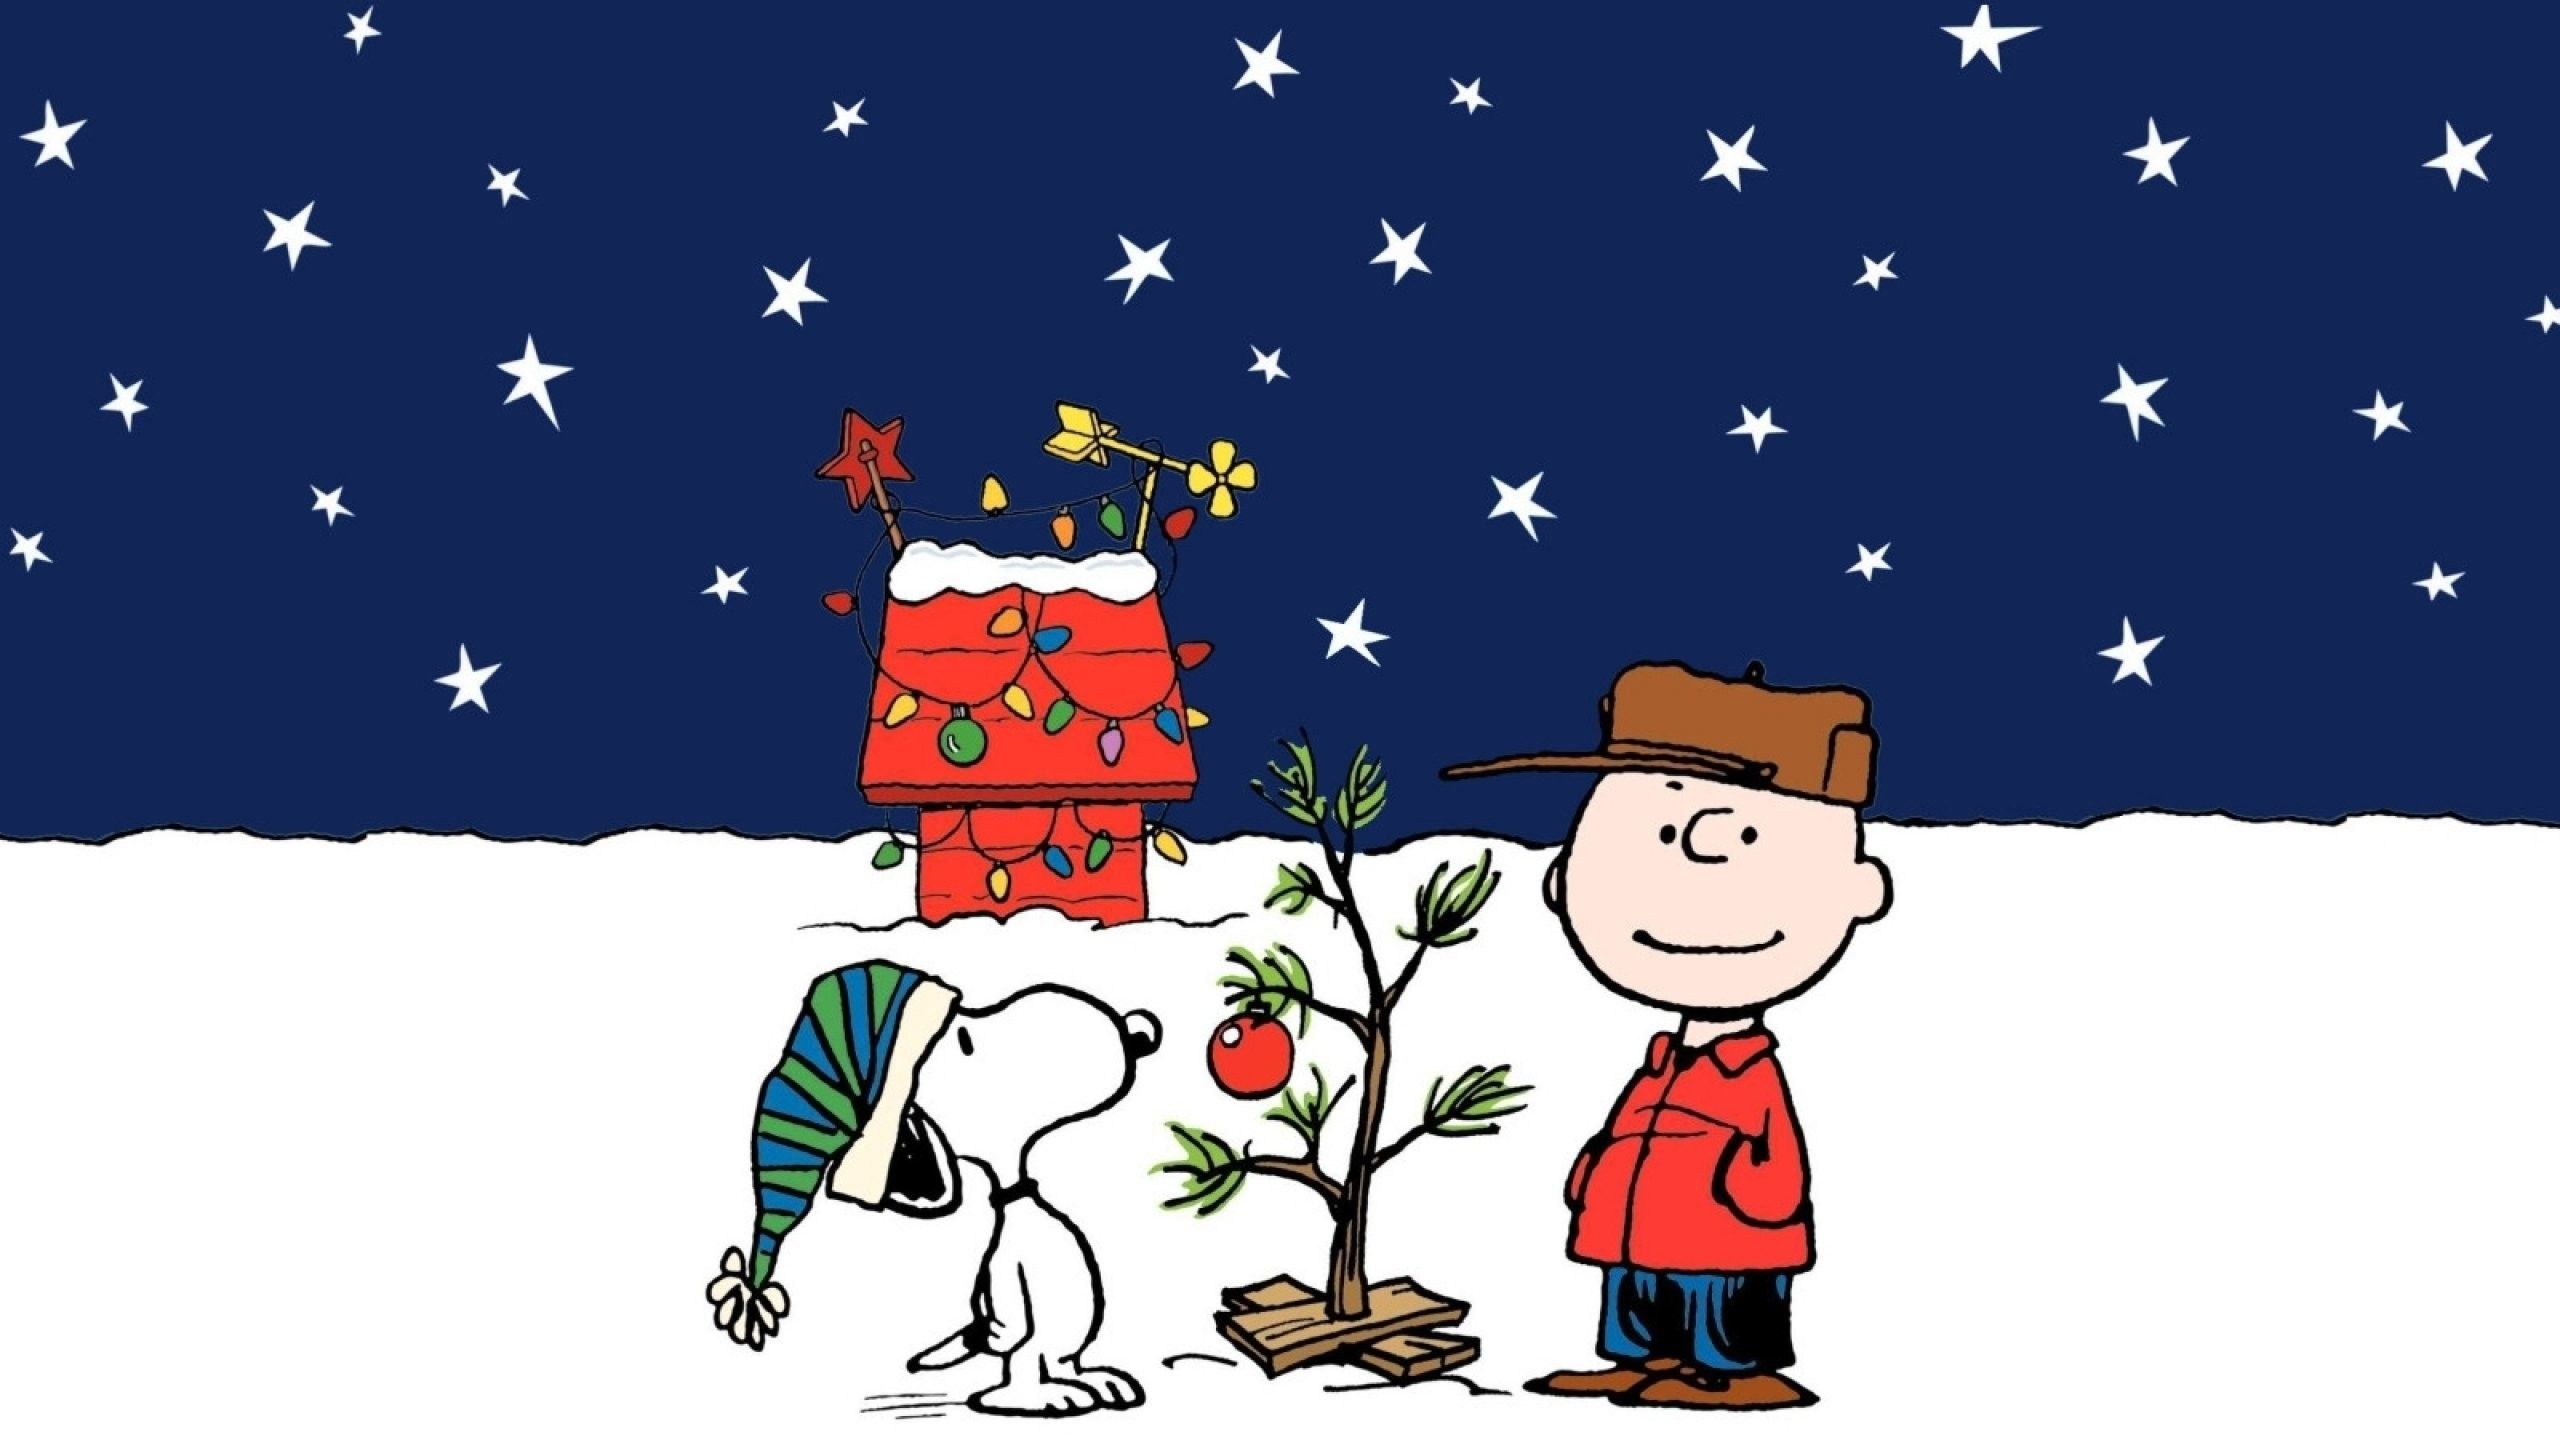 Charlie Brown Christmas tree, Snoopy and Woodstock, stars in the sky - Snoopy, Charlie Brown